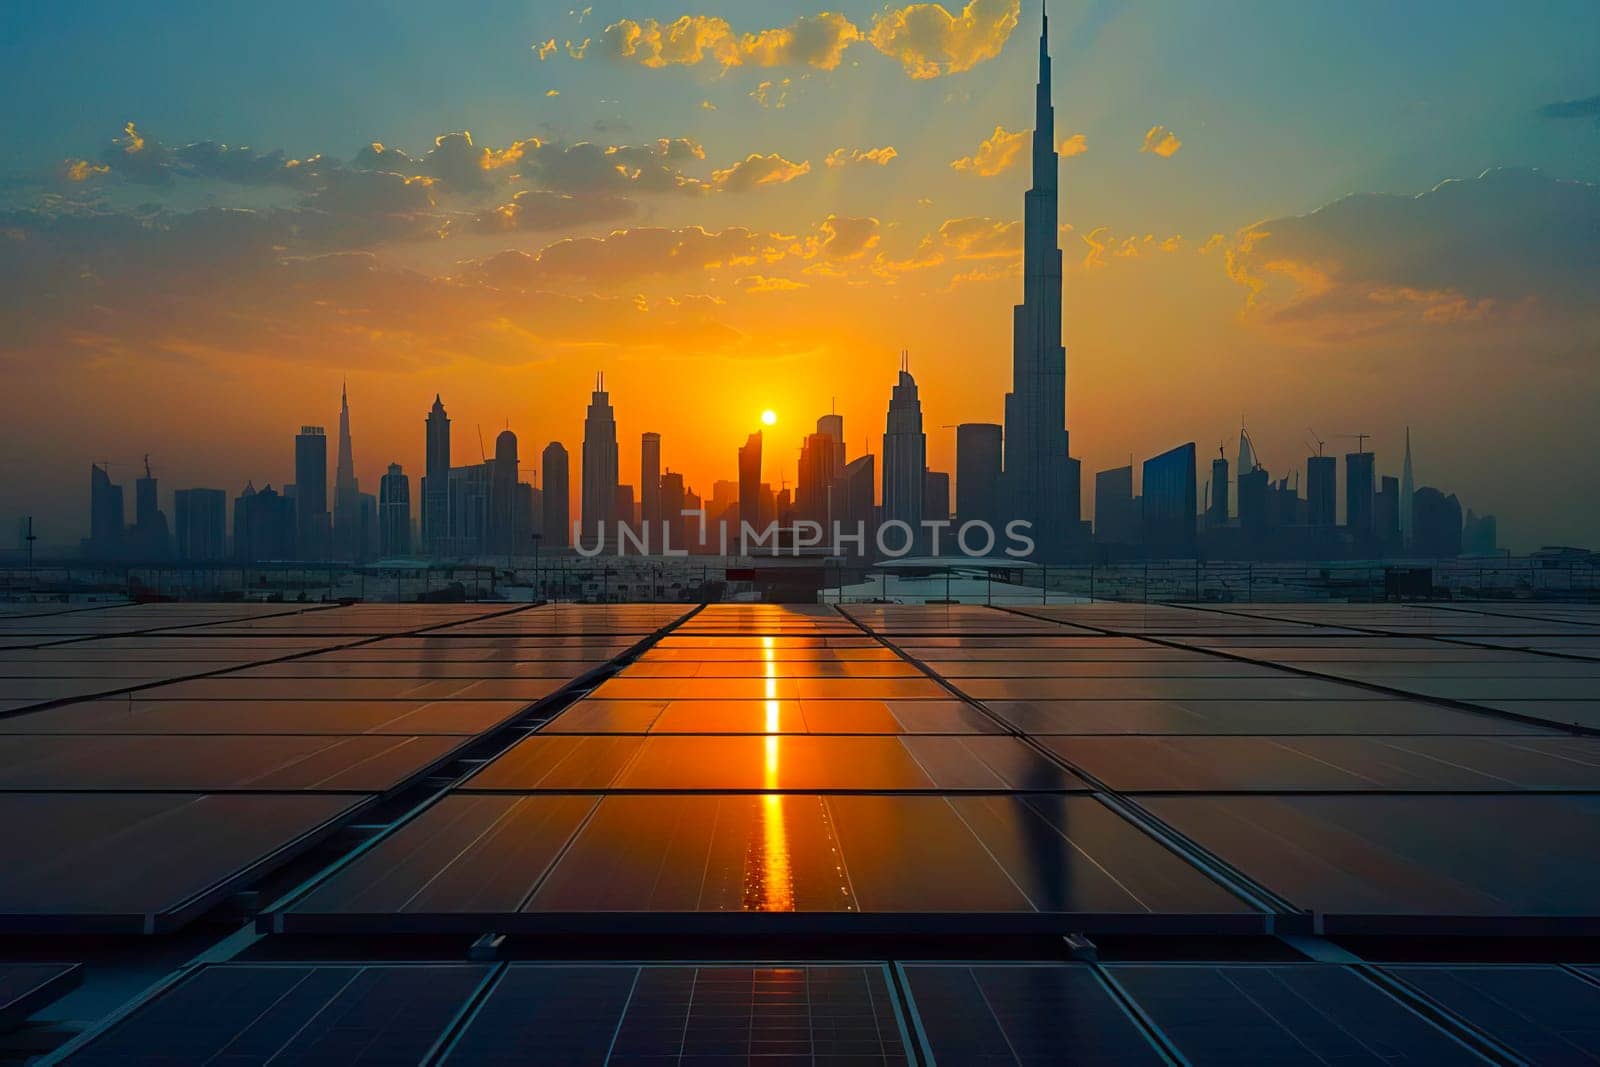 A solar panel is absorbing sunlight with the setting sun in the background.